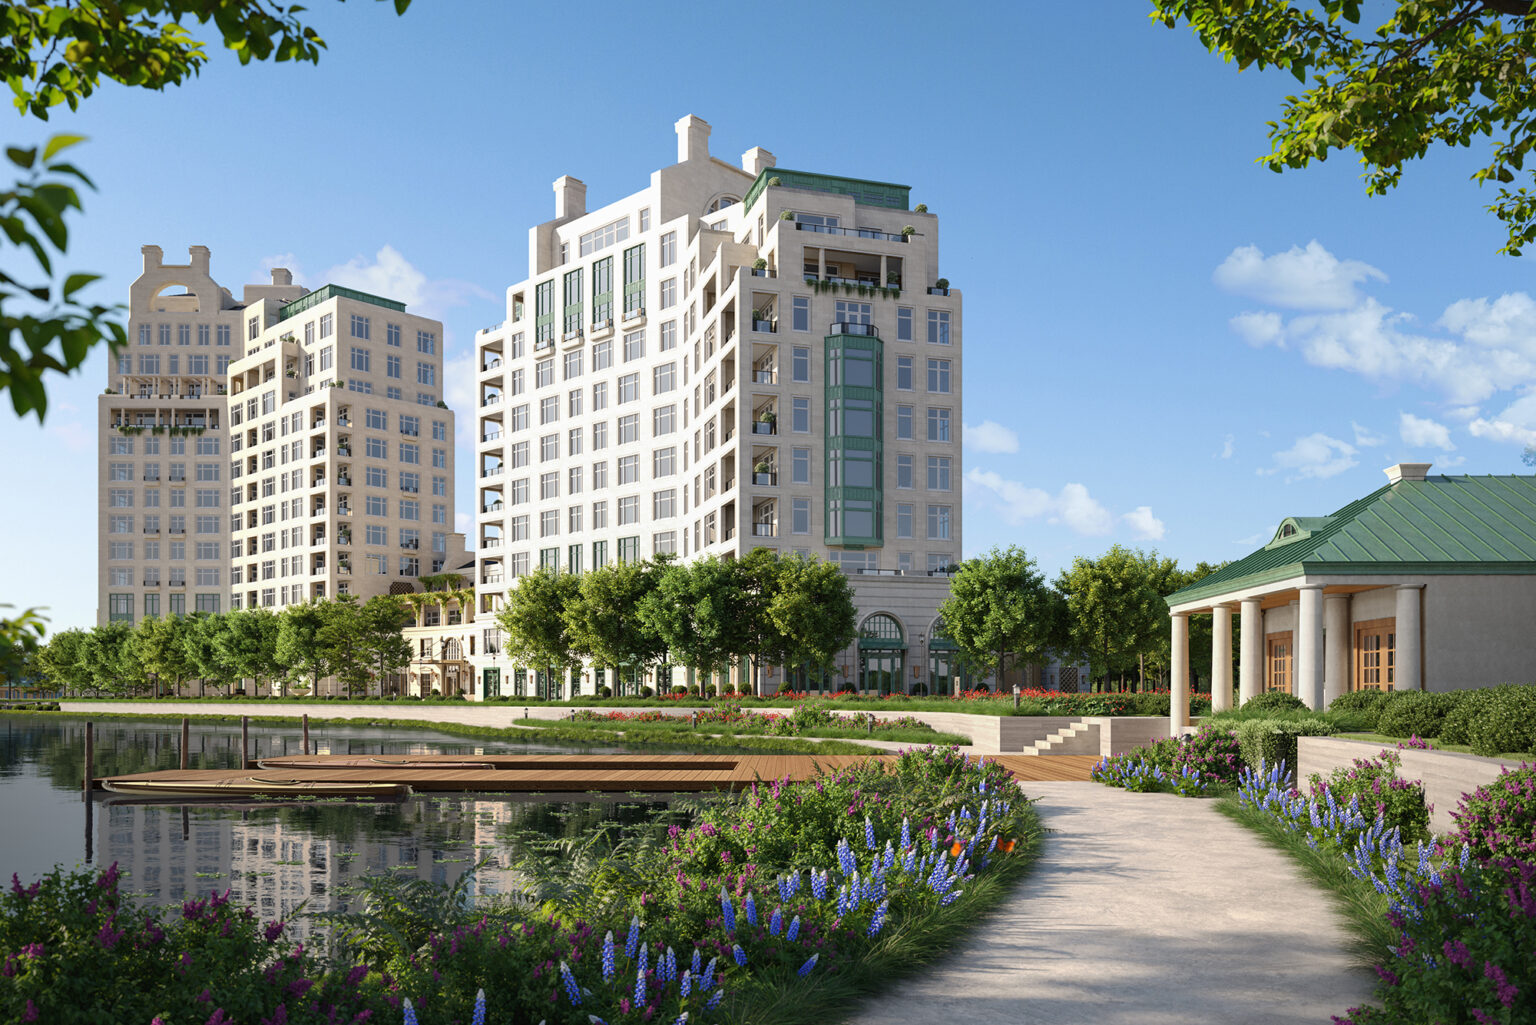 Ritz-Carlton Residences The Woodlands, Robert A.M. Stern Architects